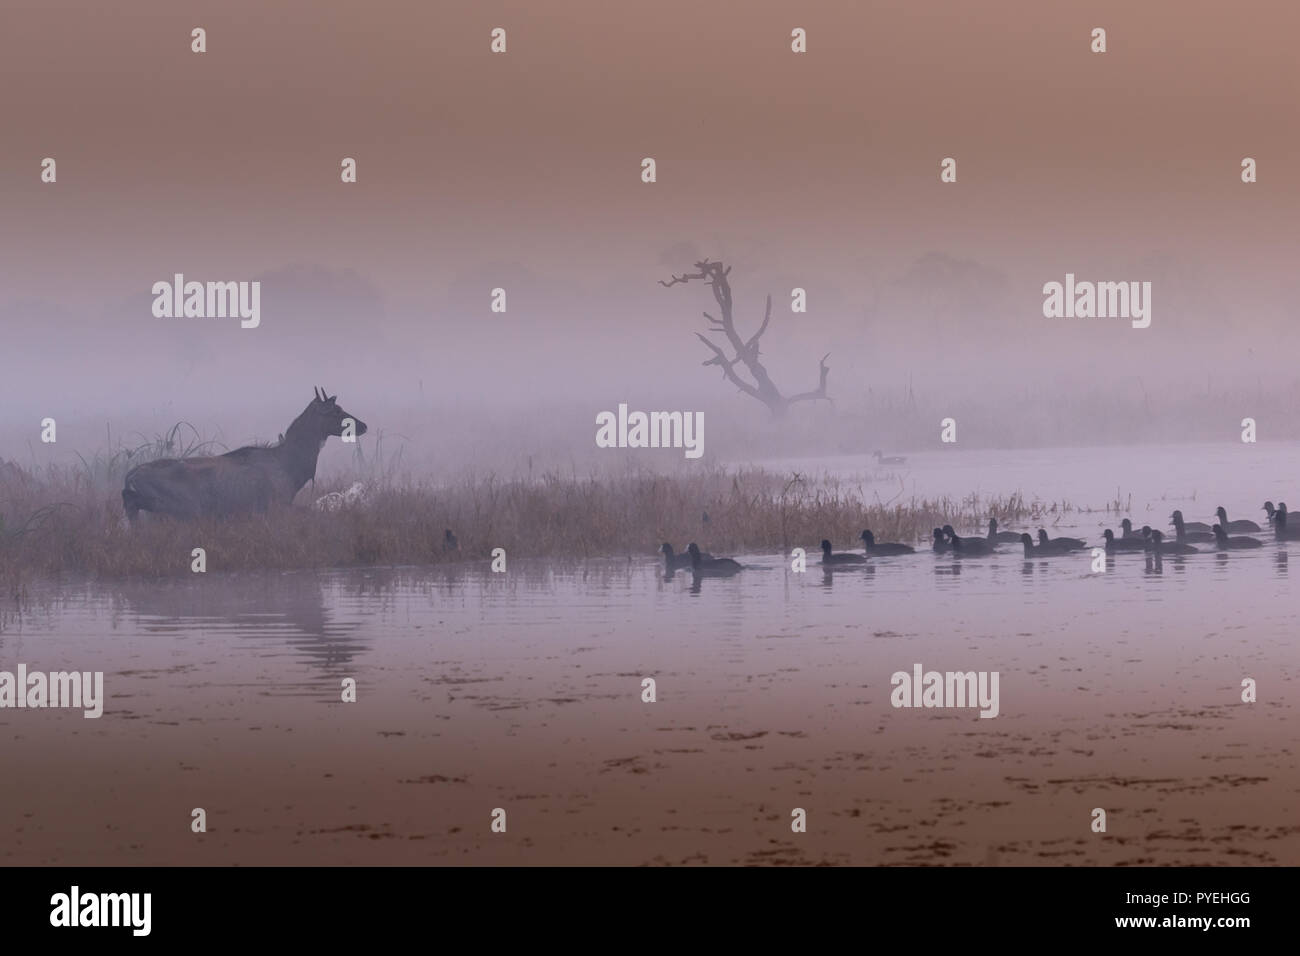 This image of Blue Bull or Nilgai is taken at Keoladeo National Park , Rajasthan in India. Stock Photo